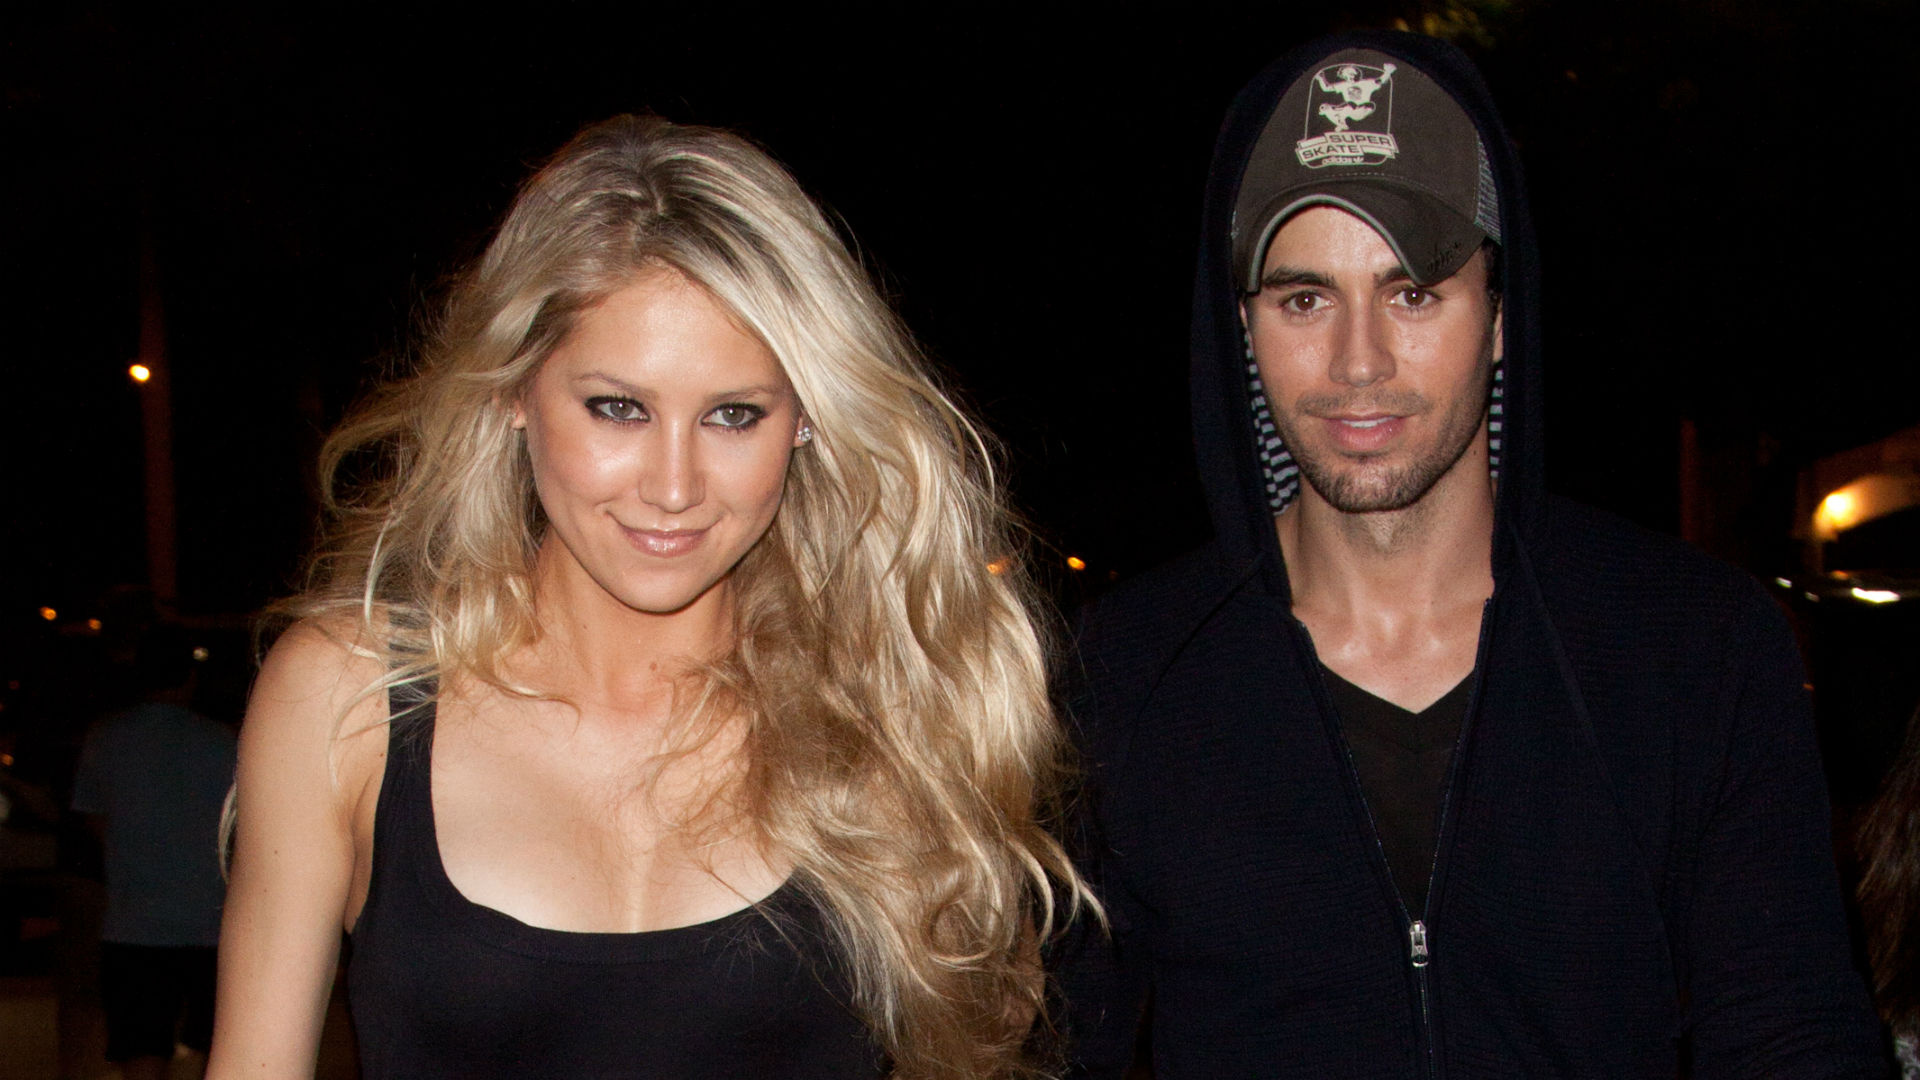 Enrique Iglesias and Anna Kournikova: The Grammy-winning singer and the tennis champ first met in late 2001. 1920x1080 Full HD Background.